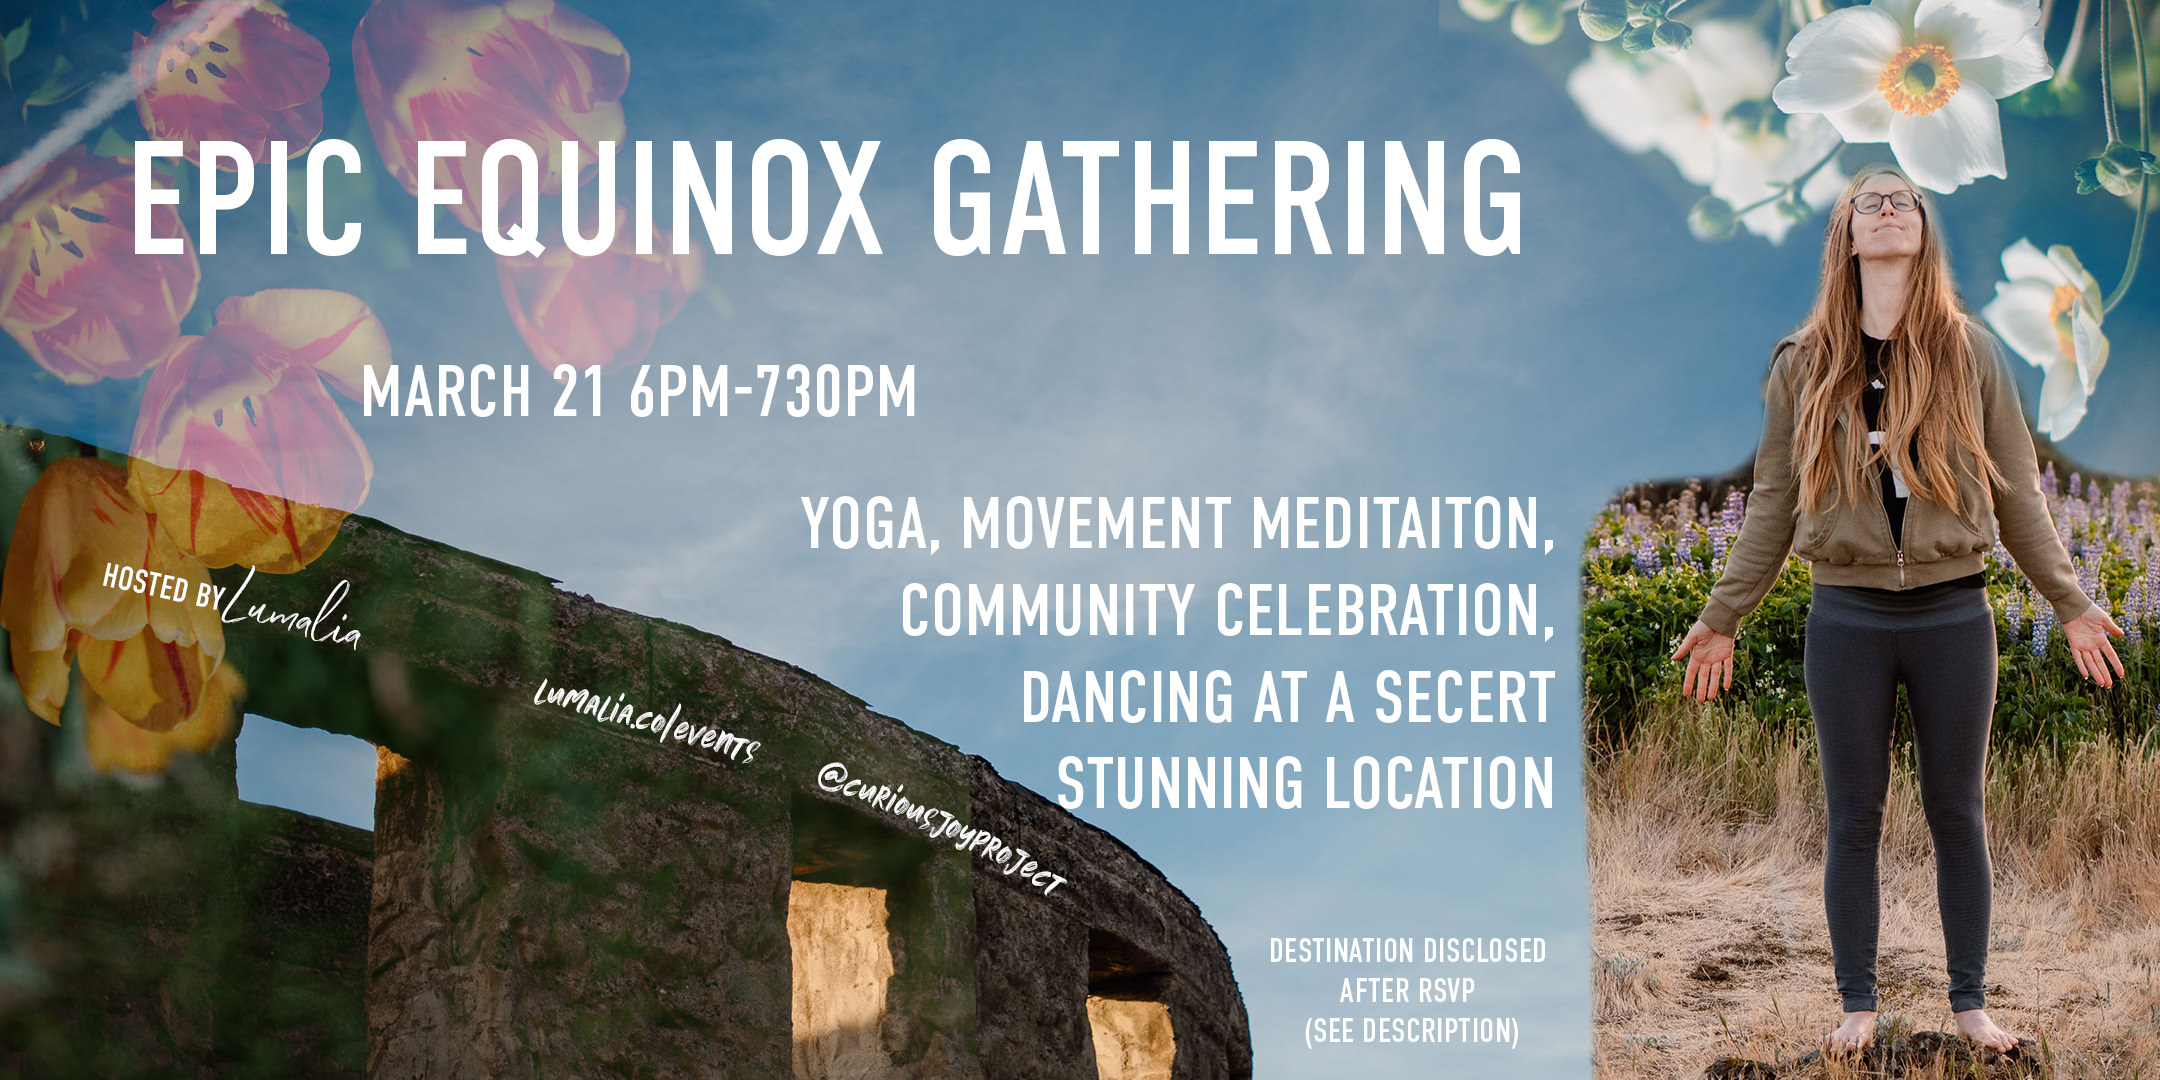 "epic equinox gathering march 21 6-730pm yoga, movement meditation, community celebration, dancing at a secert stunning location desitnionat disclosed after RSVP see description hosted by lumalia lumalia.co @curiousjoyproject" over image of circle architecture and female standing with arms wide hope and flowers overlaid on the top of image